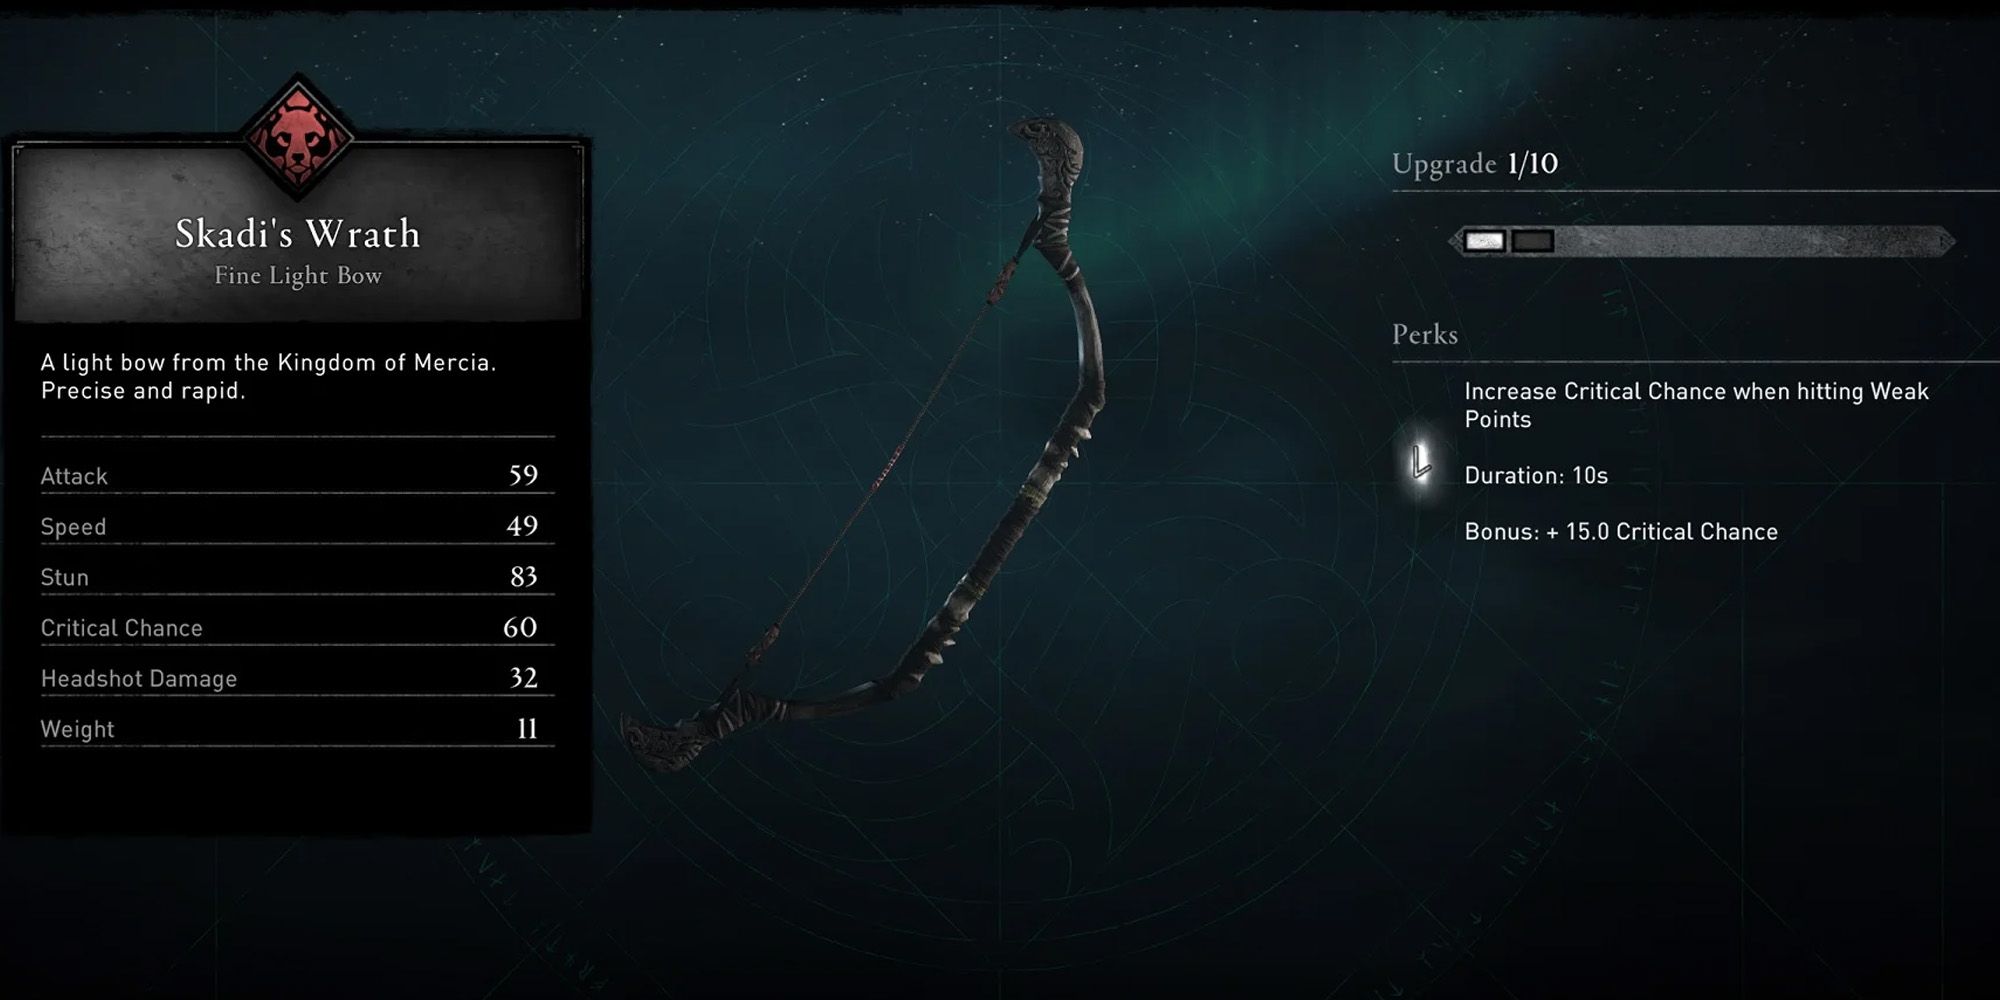 Image of the Skadi's Wrath bow and its stats in Assassin's Creed Valhalla